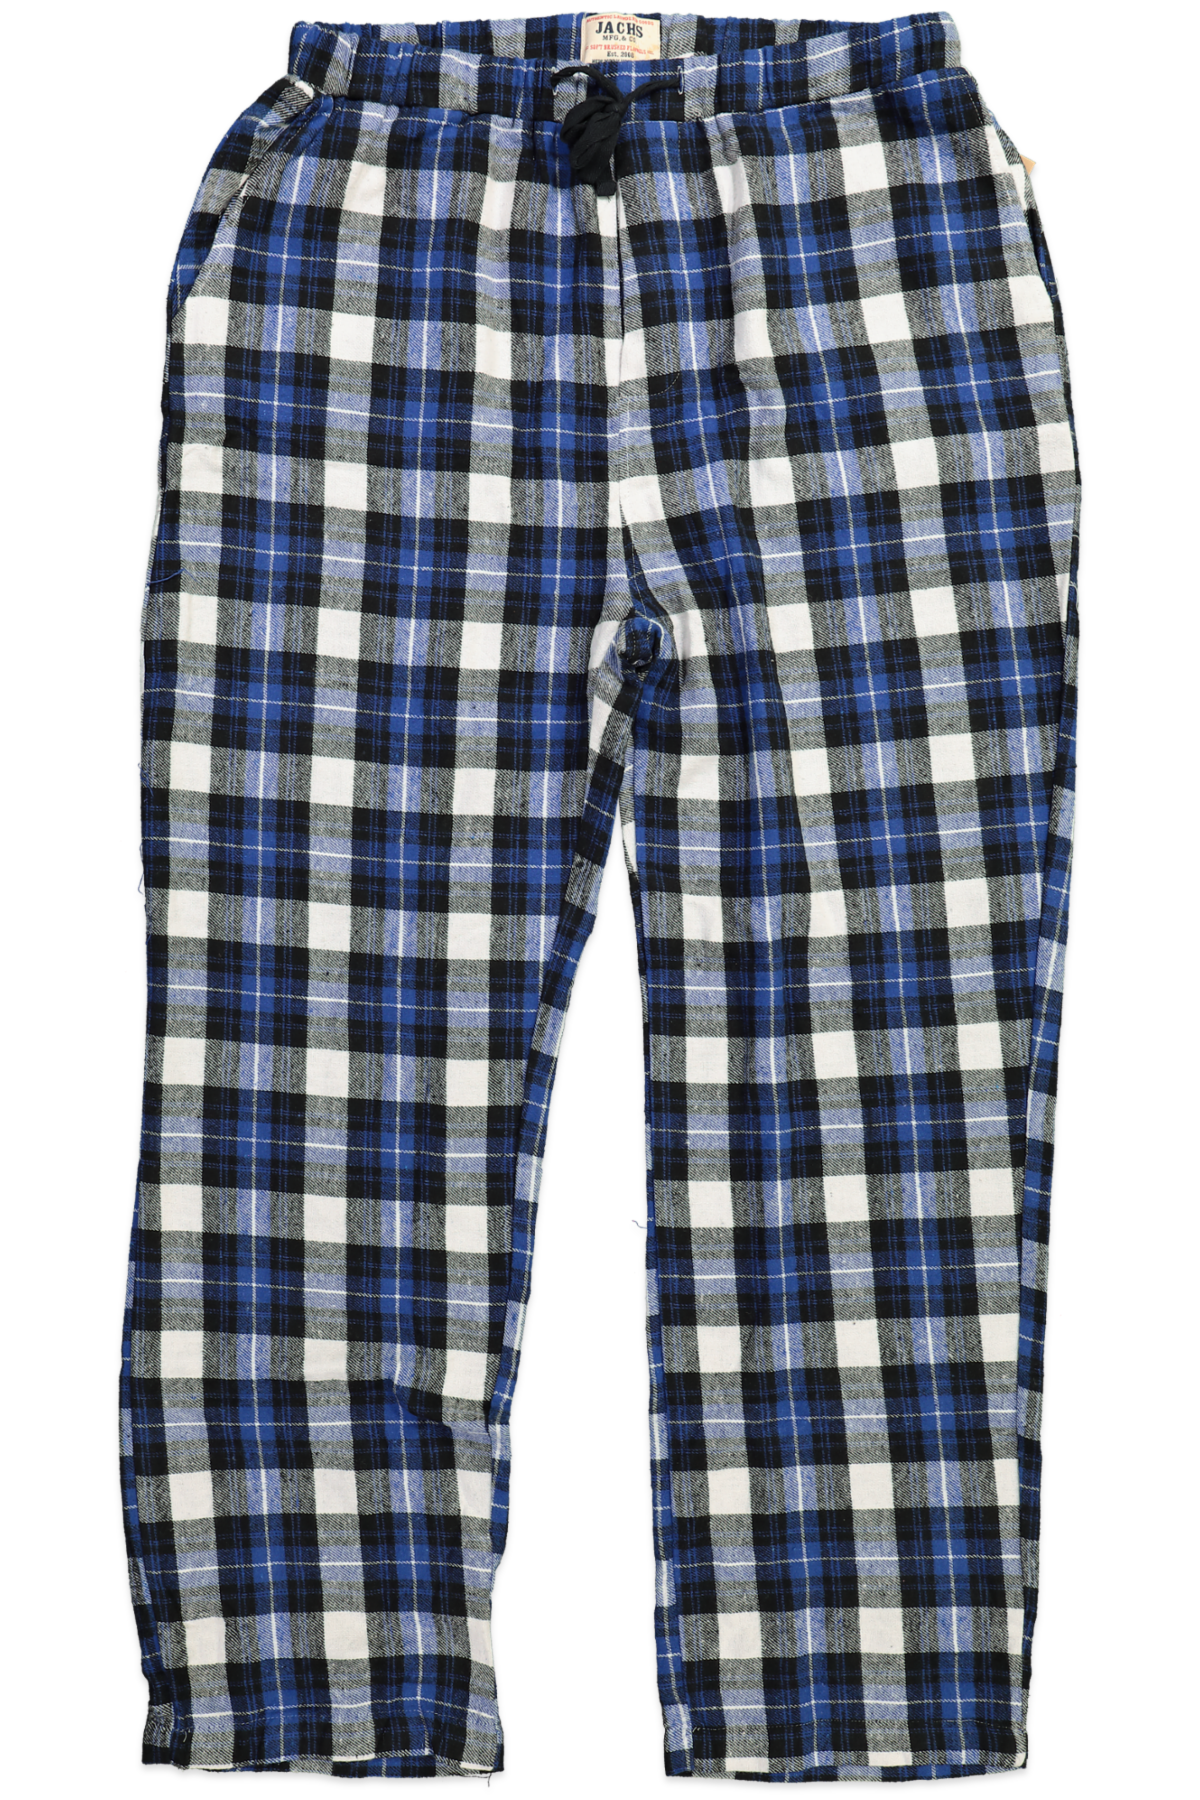 JACHS NY MENS FLANNEL PANT NAVY